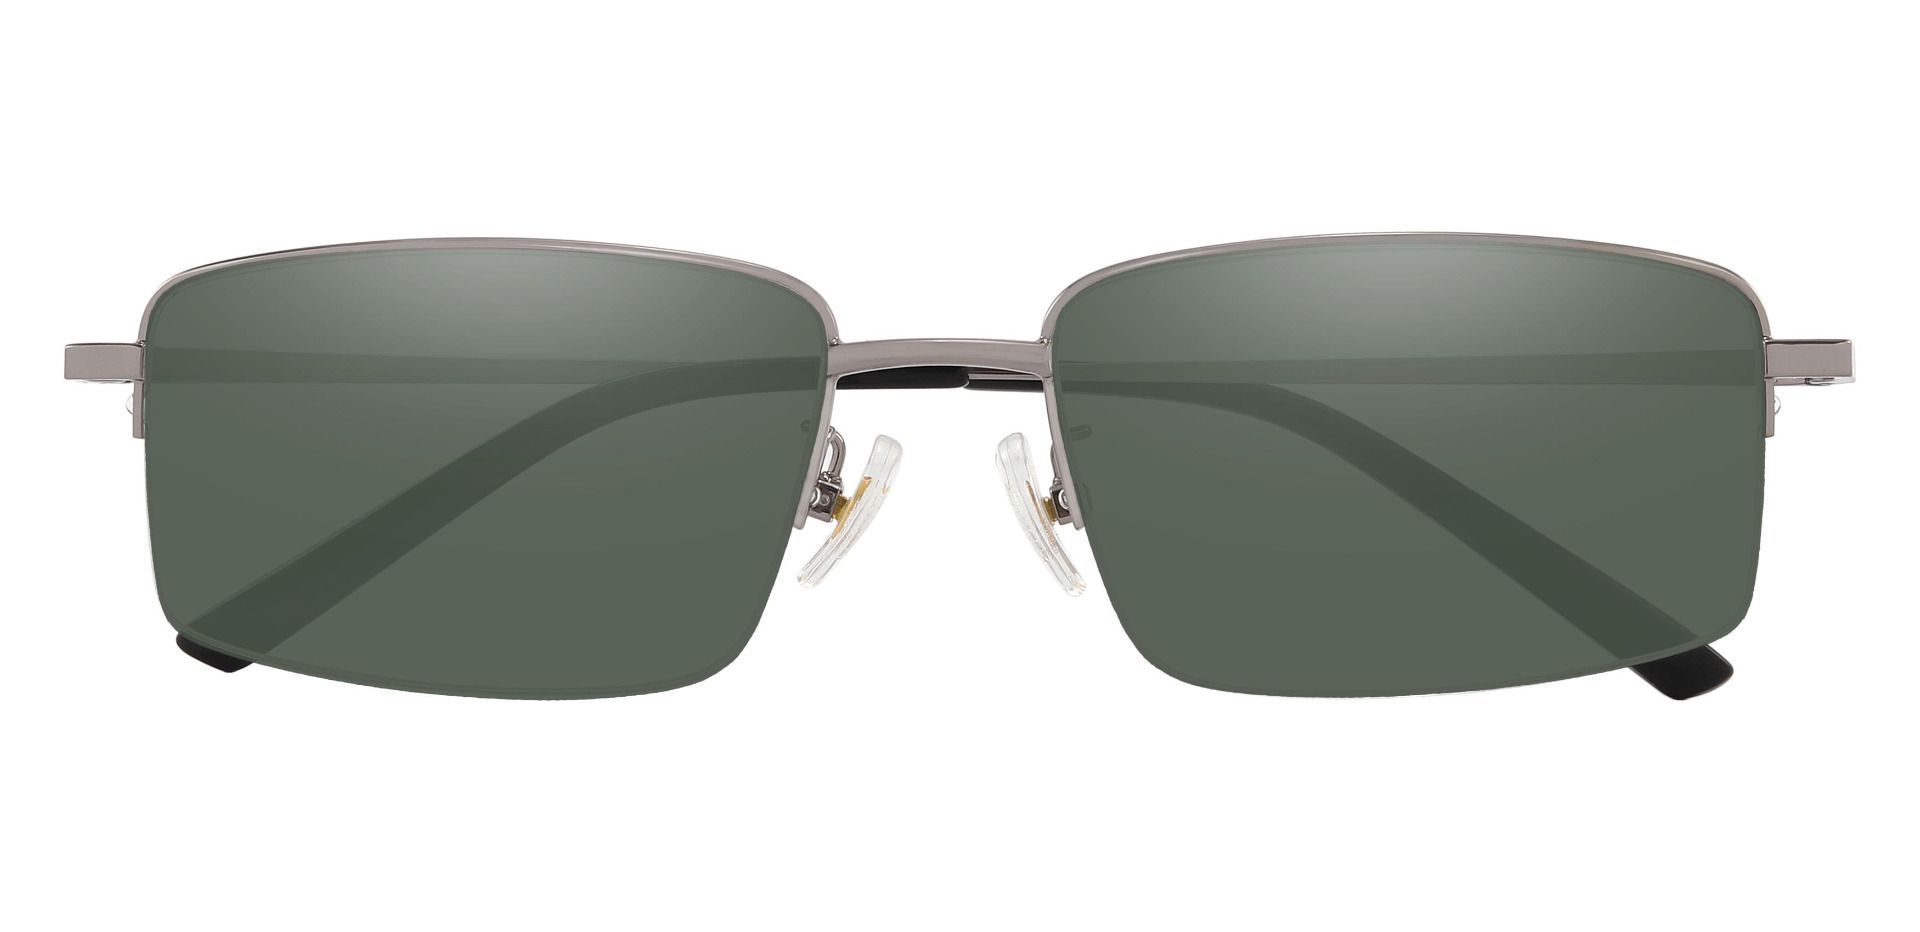 Wayne Rectangle Lined Bifocal Sunglasses - Gray Frame With Green Lenses